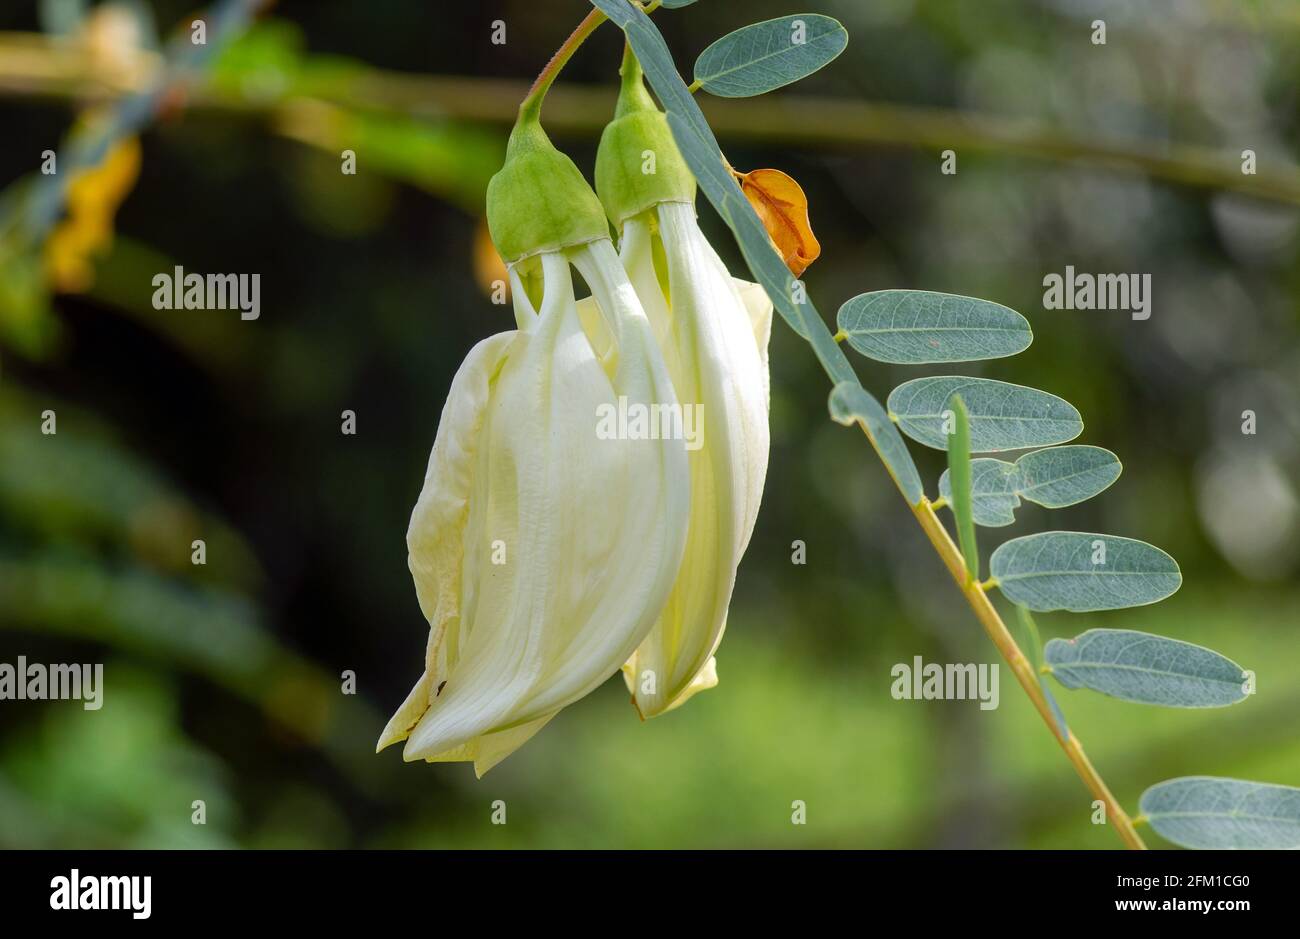 Sesbania grandiflora flower, a famous agroforestry plant for food, green manure, fodder, forage, selected focus. Commonly known as August flower, whit Stock Photo